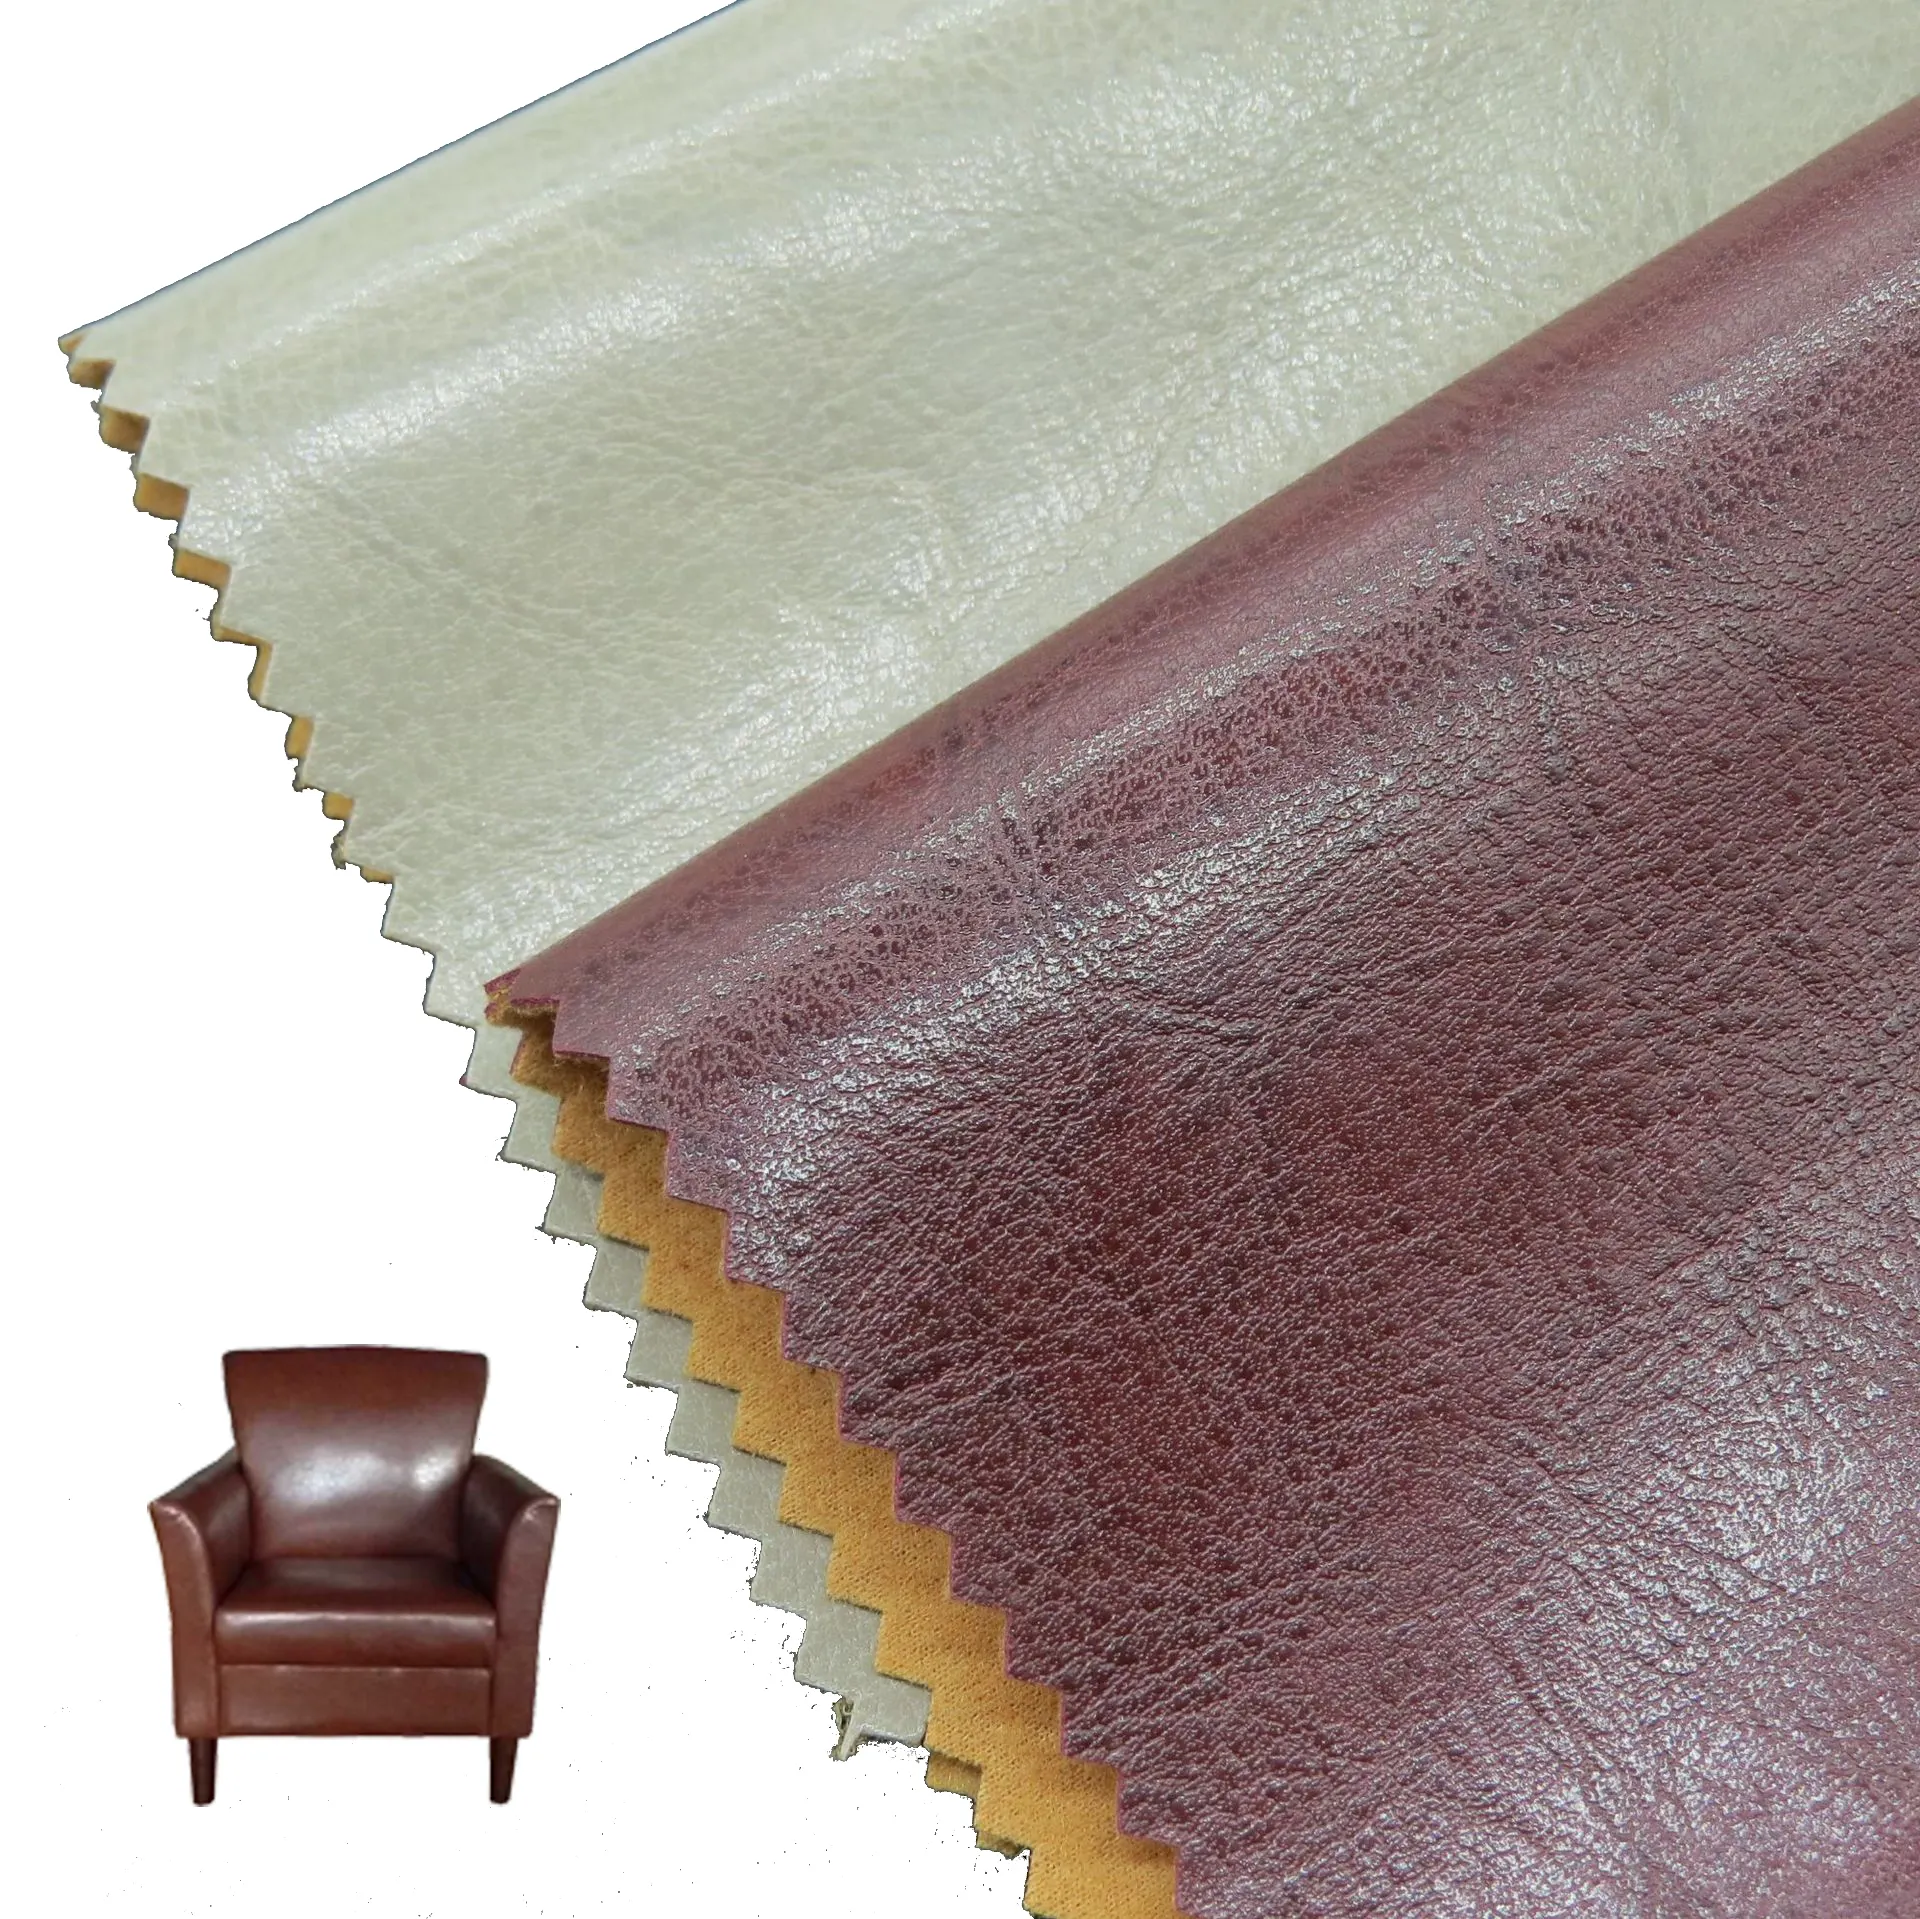 R64 PVC Synthetic Leather for Sofa Jewelry Box and Leather Pouch Packaging PVC Leather Embossed Weave for Car Seat Cover Handbag